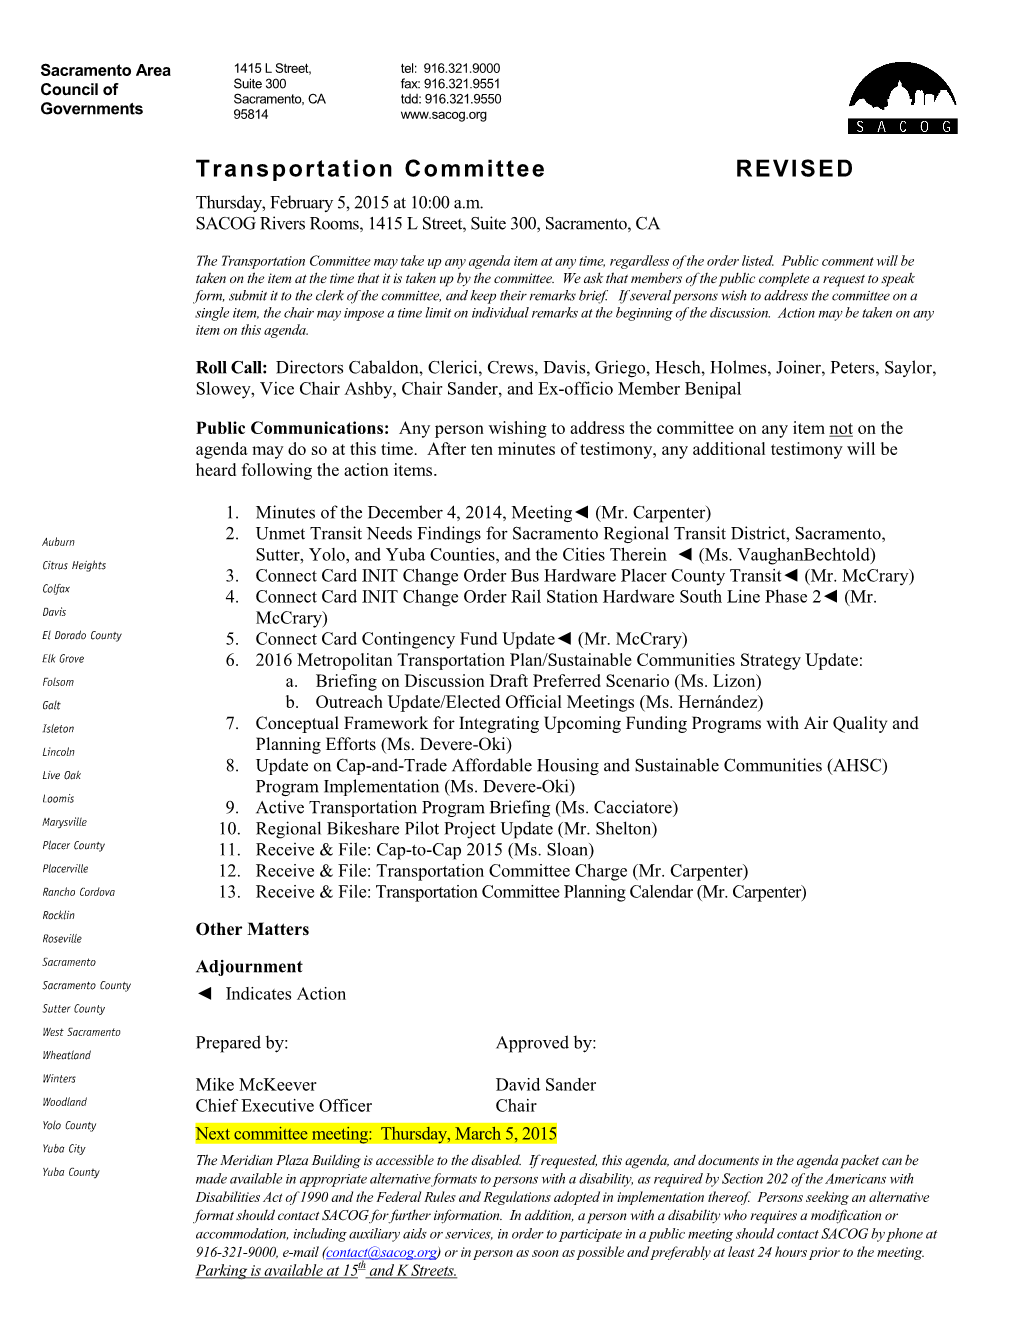 Transportation Committee REVISED Thursday, February 5, 2015 at 10:00 A.M